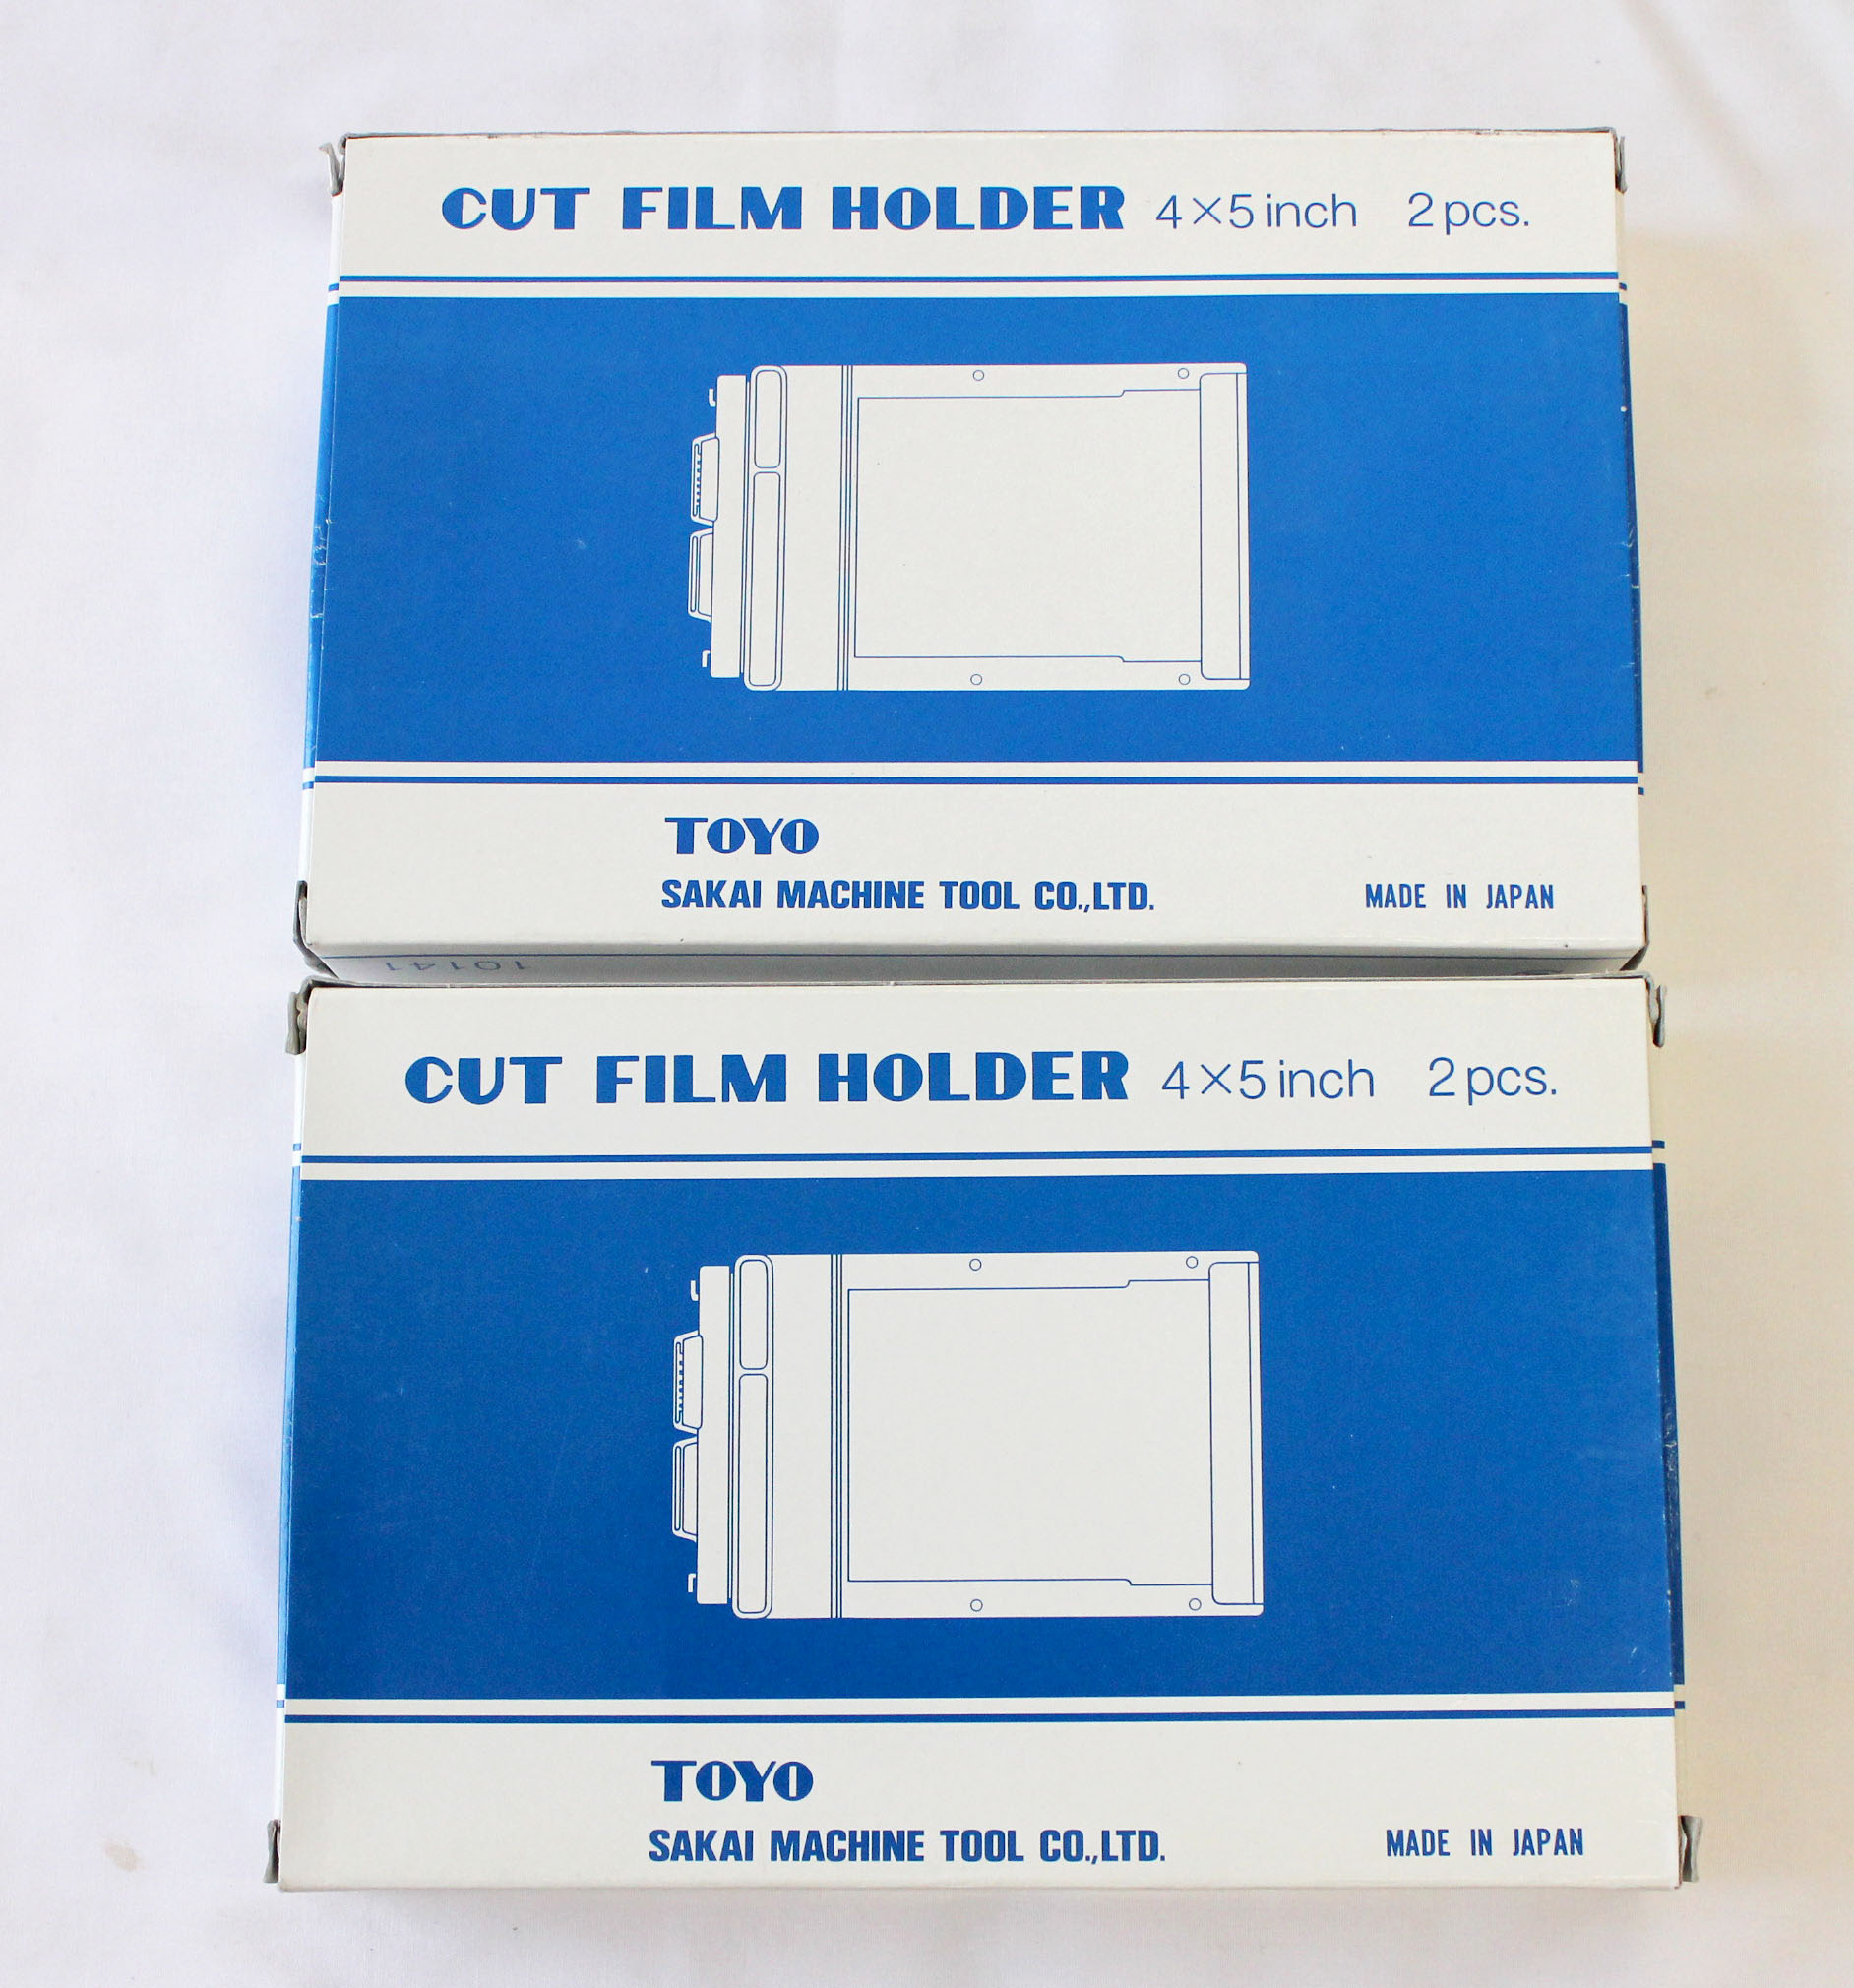  Toyo 4x5 inch Cut Film Holder 4pcs (2 boxes) from Japan Photo 0